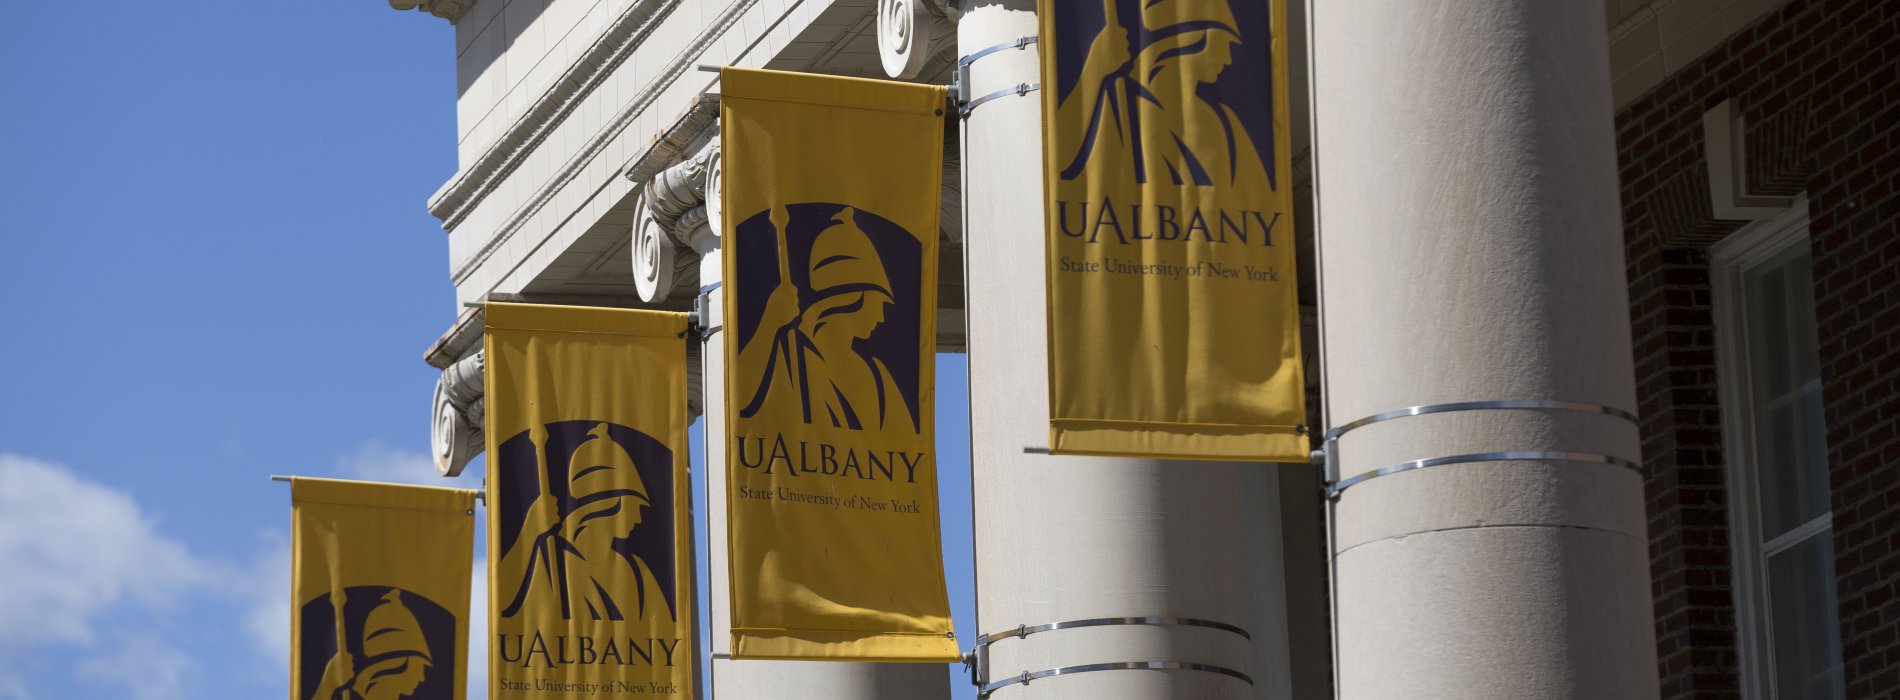 UAlbany banner flags on columns of downtown campus building